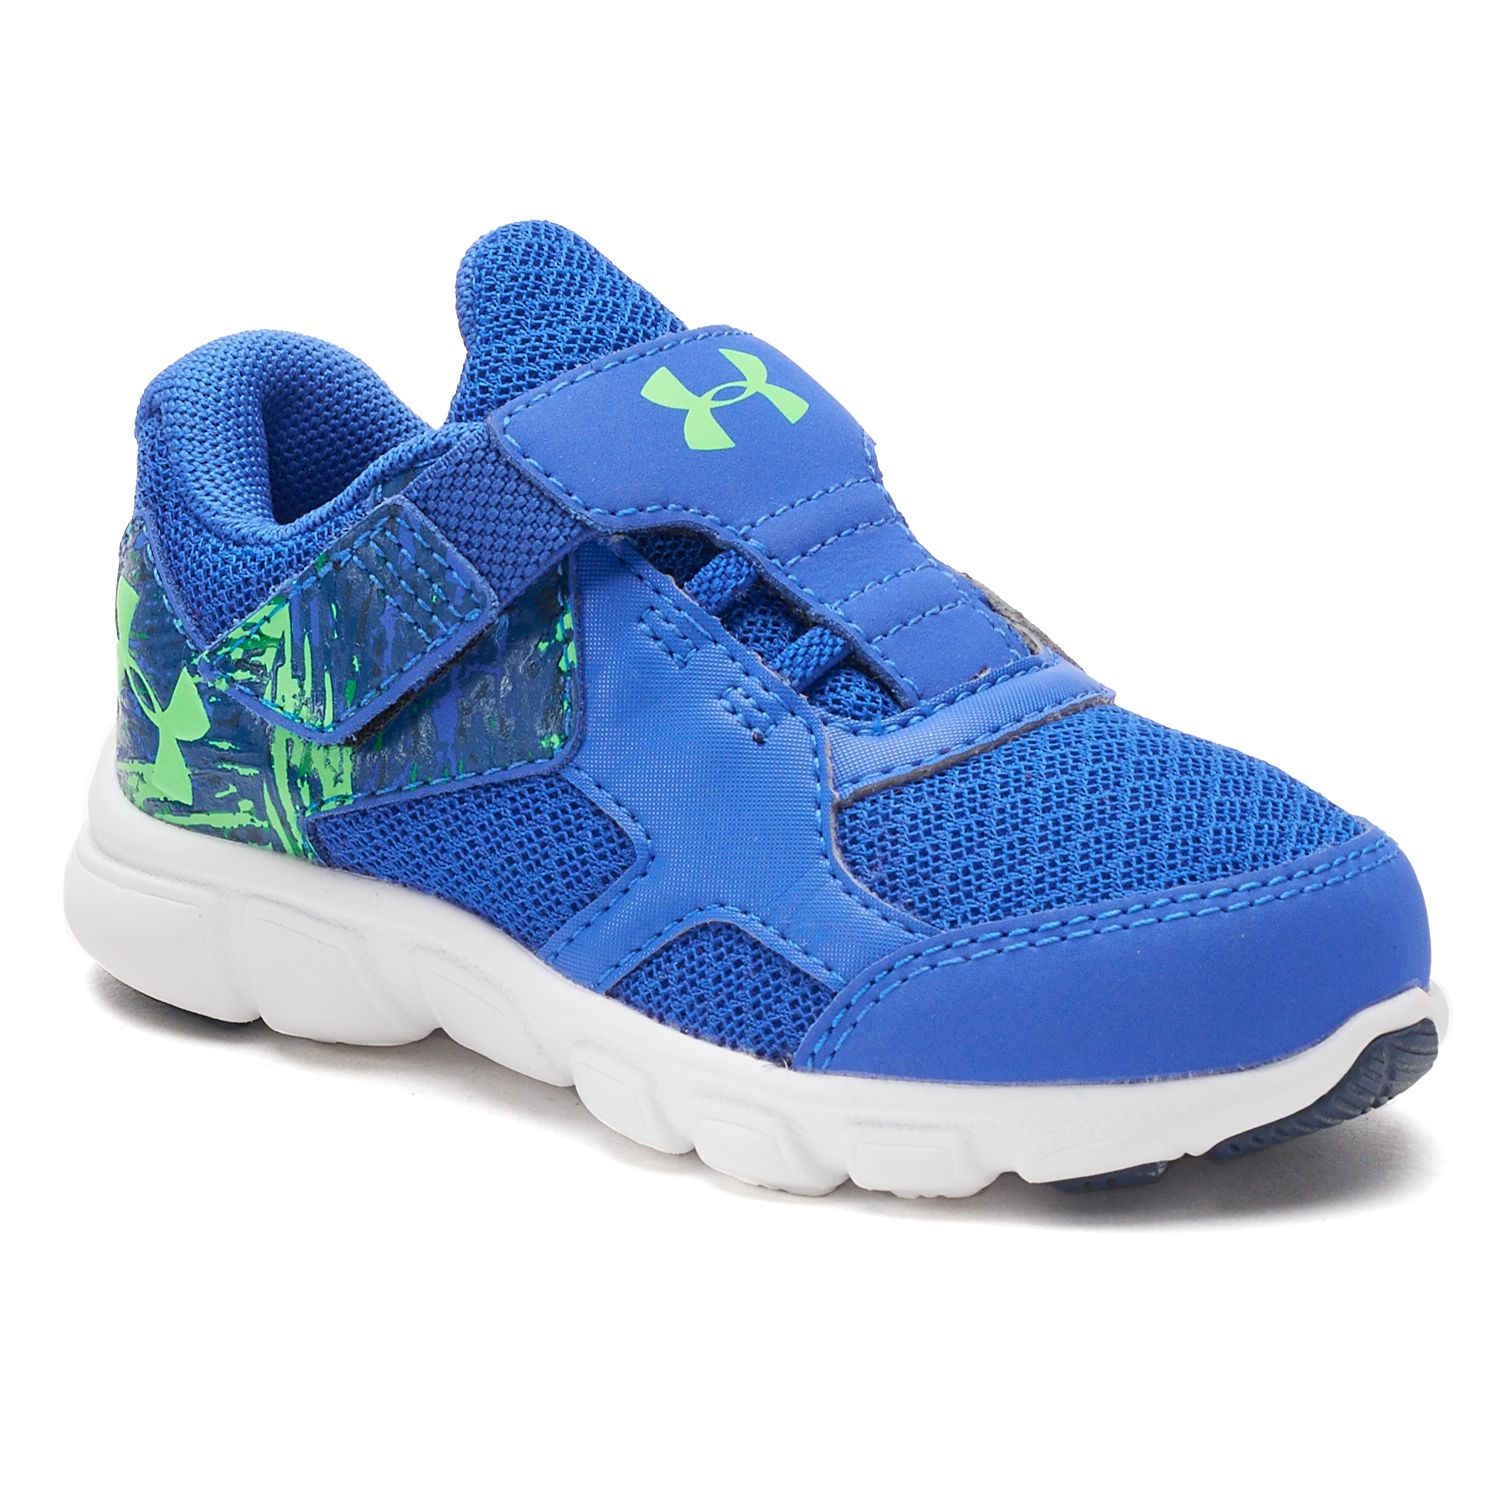 Under Armour Thrill Toddler Boy's Sneakers